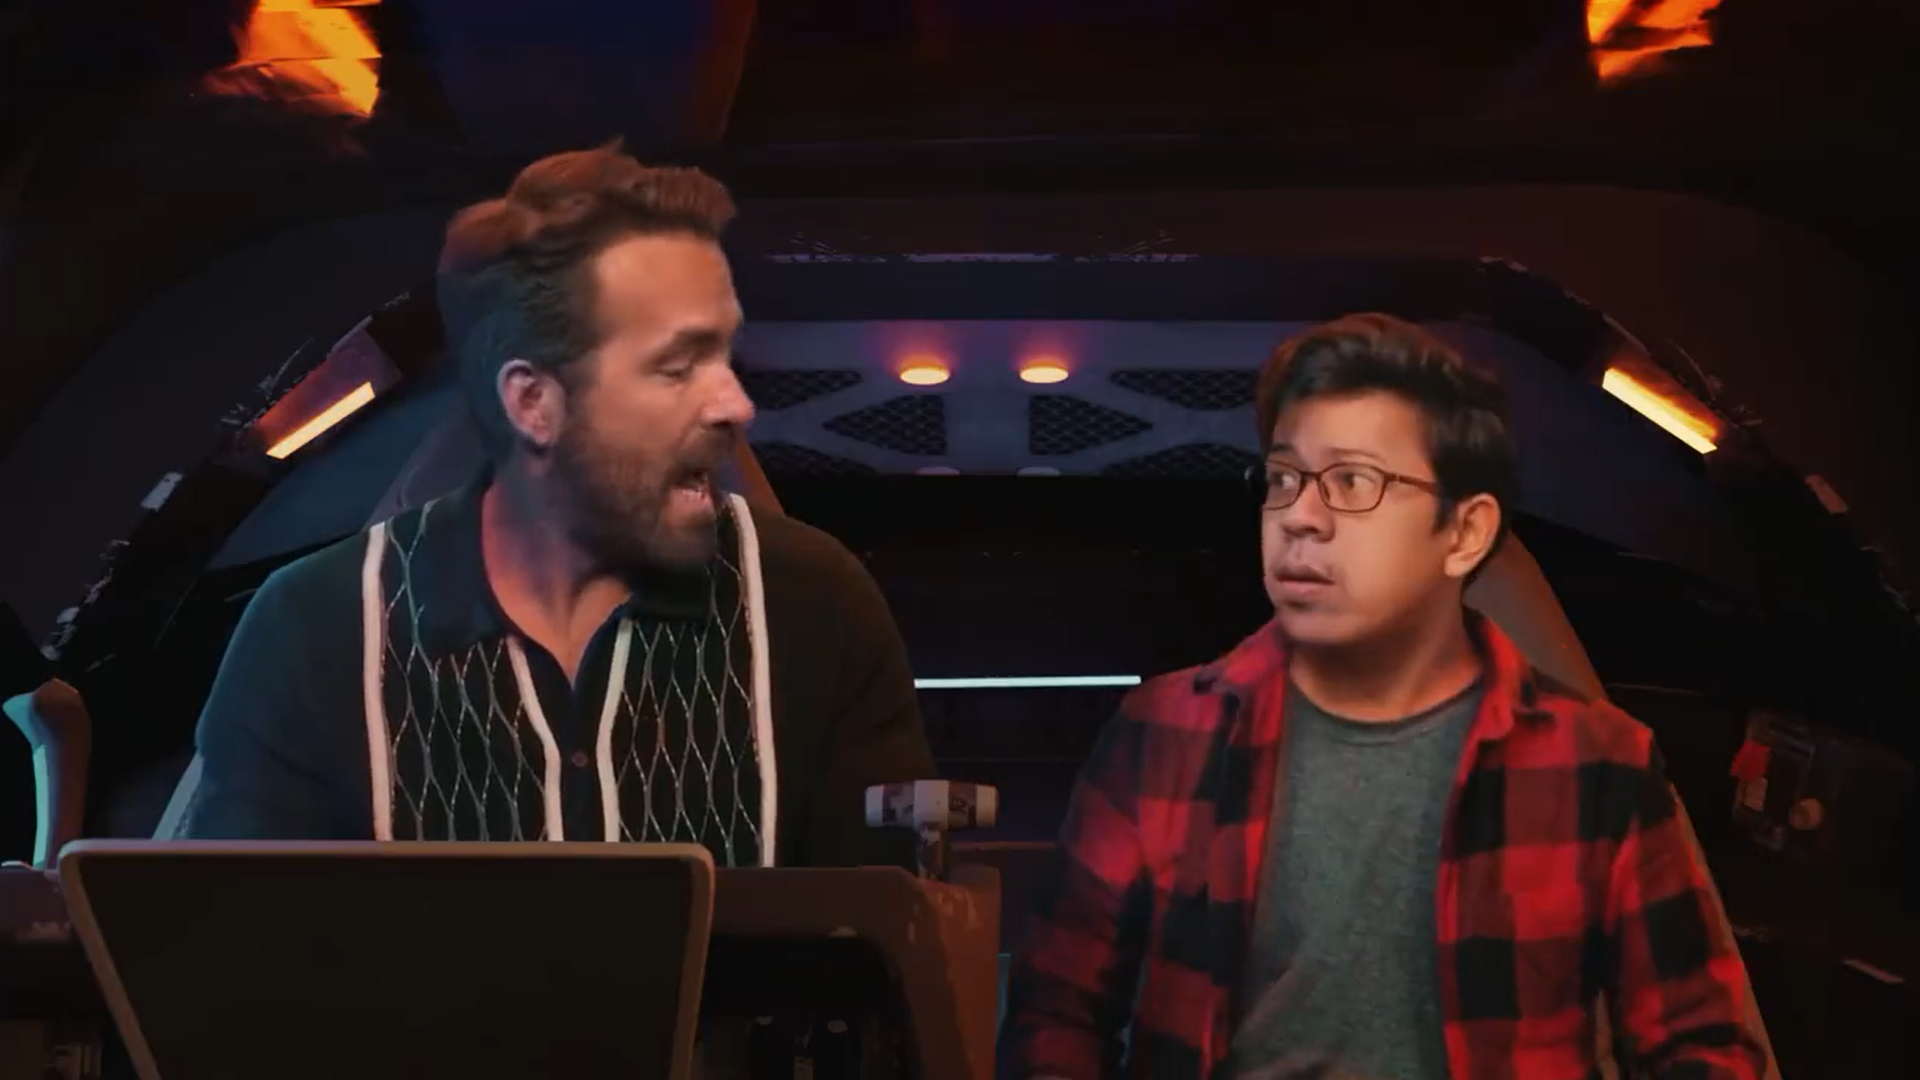 Sofian's back with a new video - this time starring deadpool star ryan reynolds